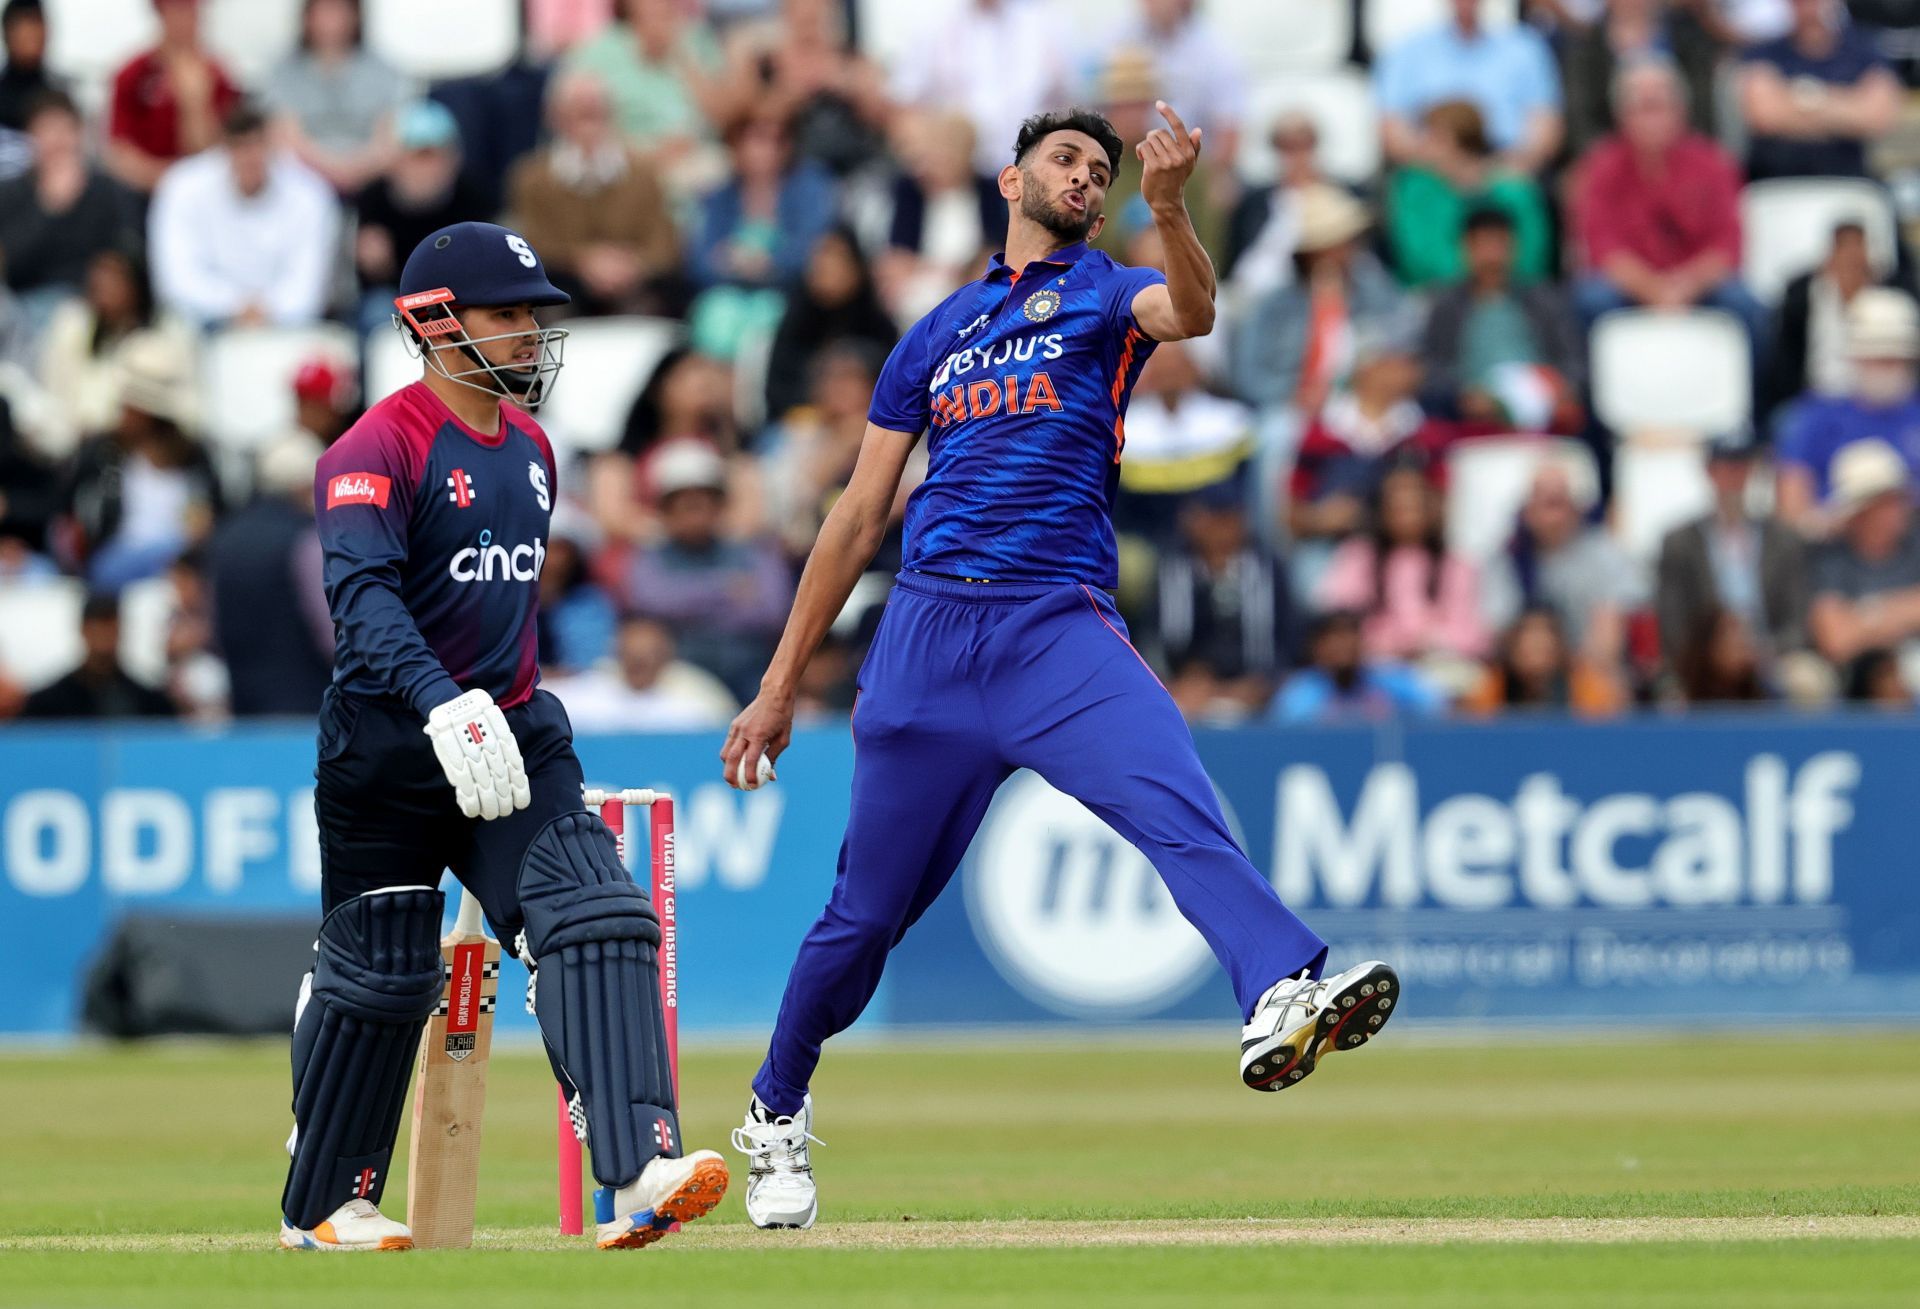 India could persist with Prasidh as the third seamer